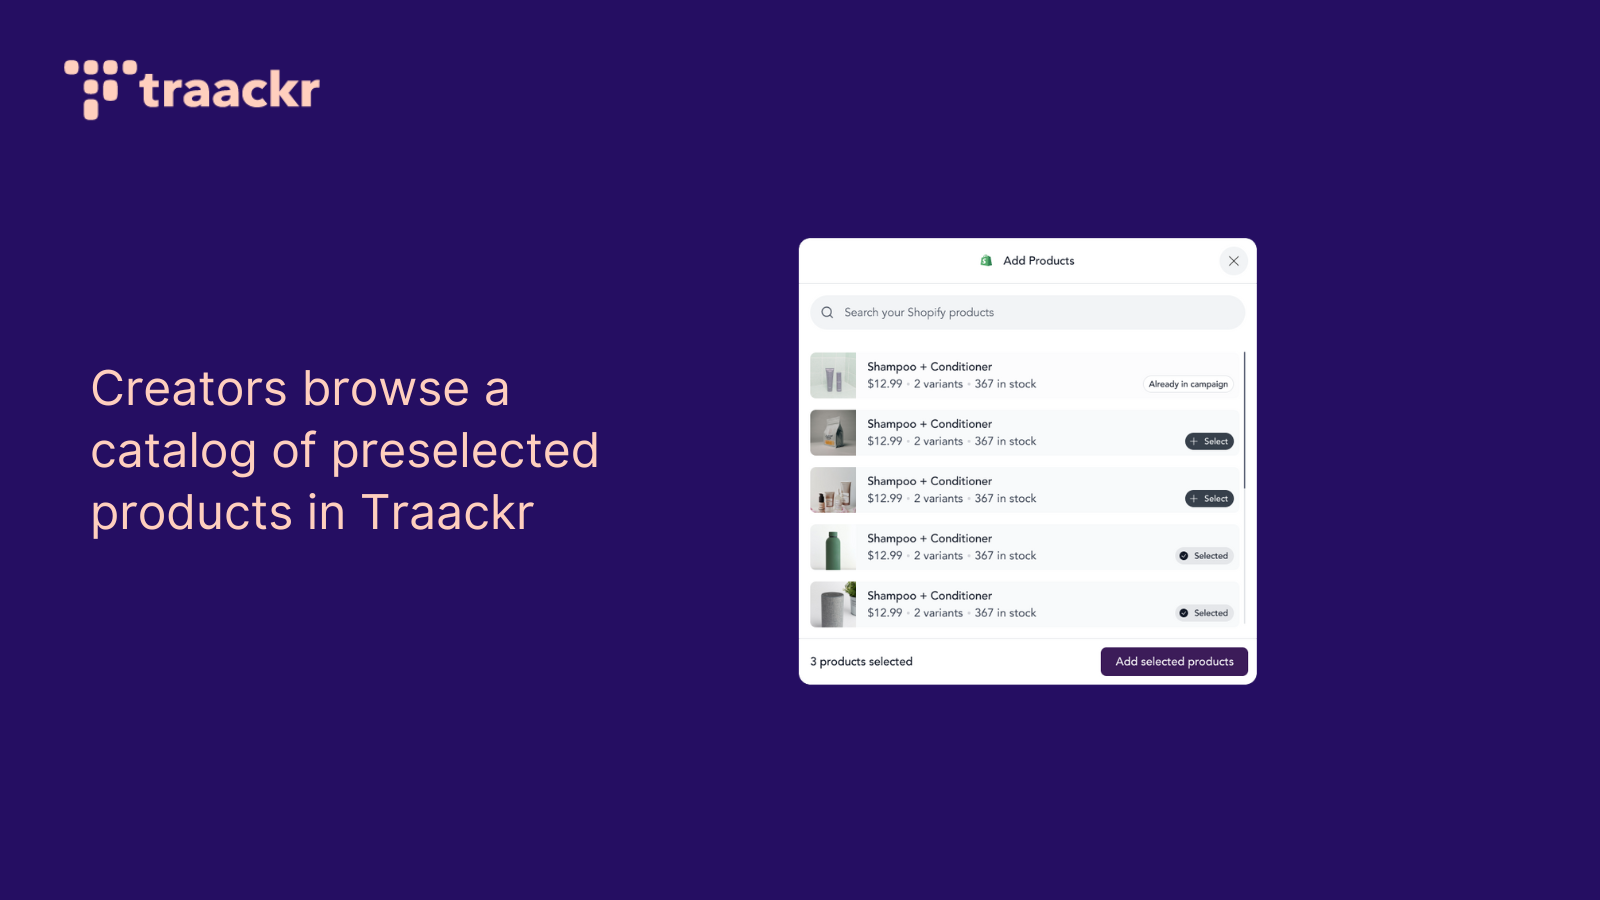 Creators browse a catalog of preselected products in Traackr